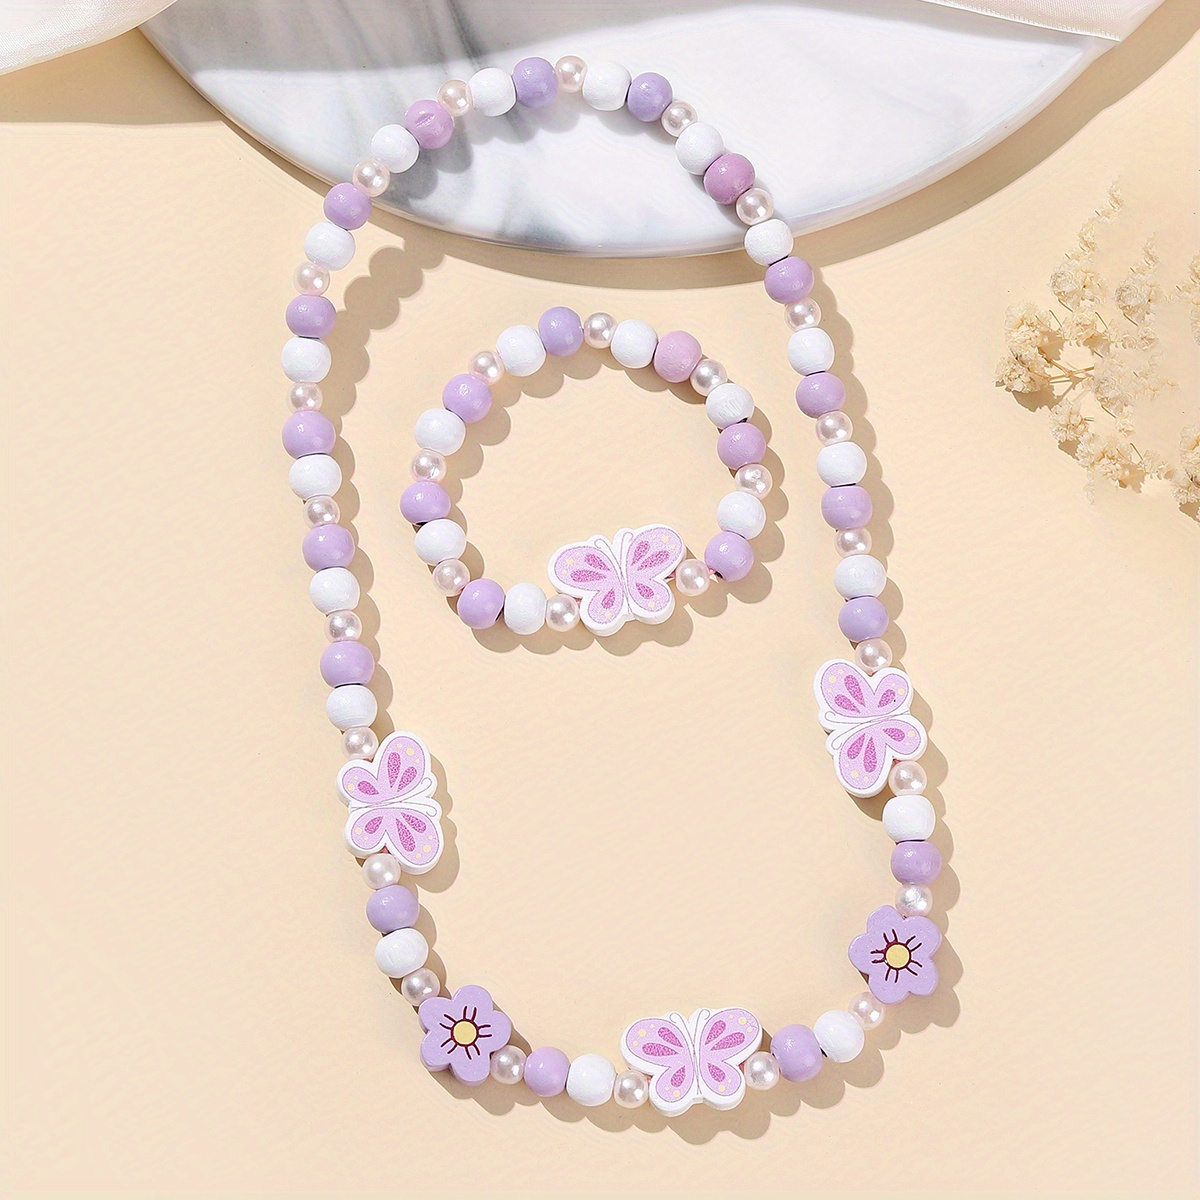 4pcs Earrings + Necklace + Bracelet Coquette Style Jewelry, Jewels Set Made of Beads Match Daily Outfits Sweet Gift for Female,Temu